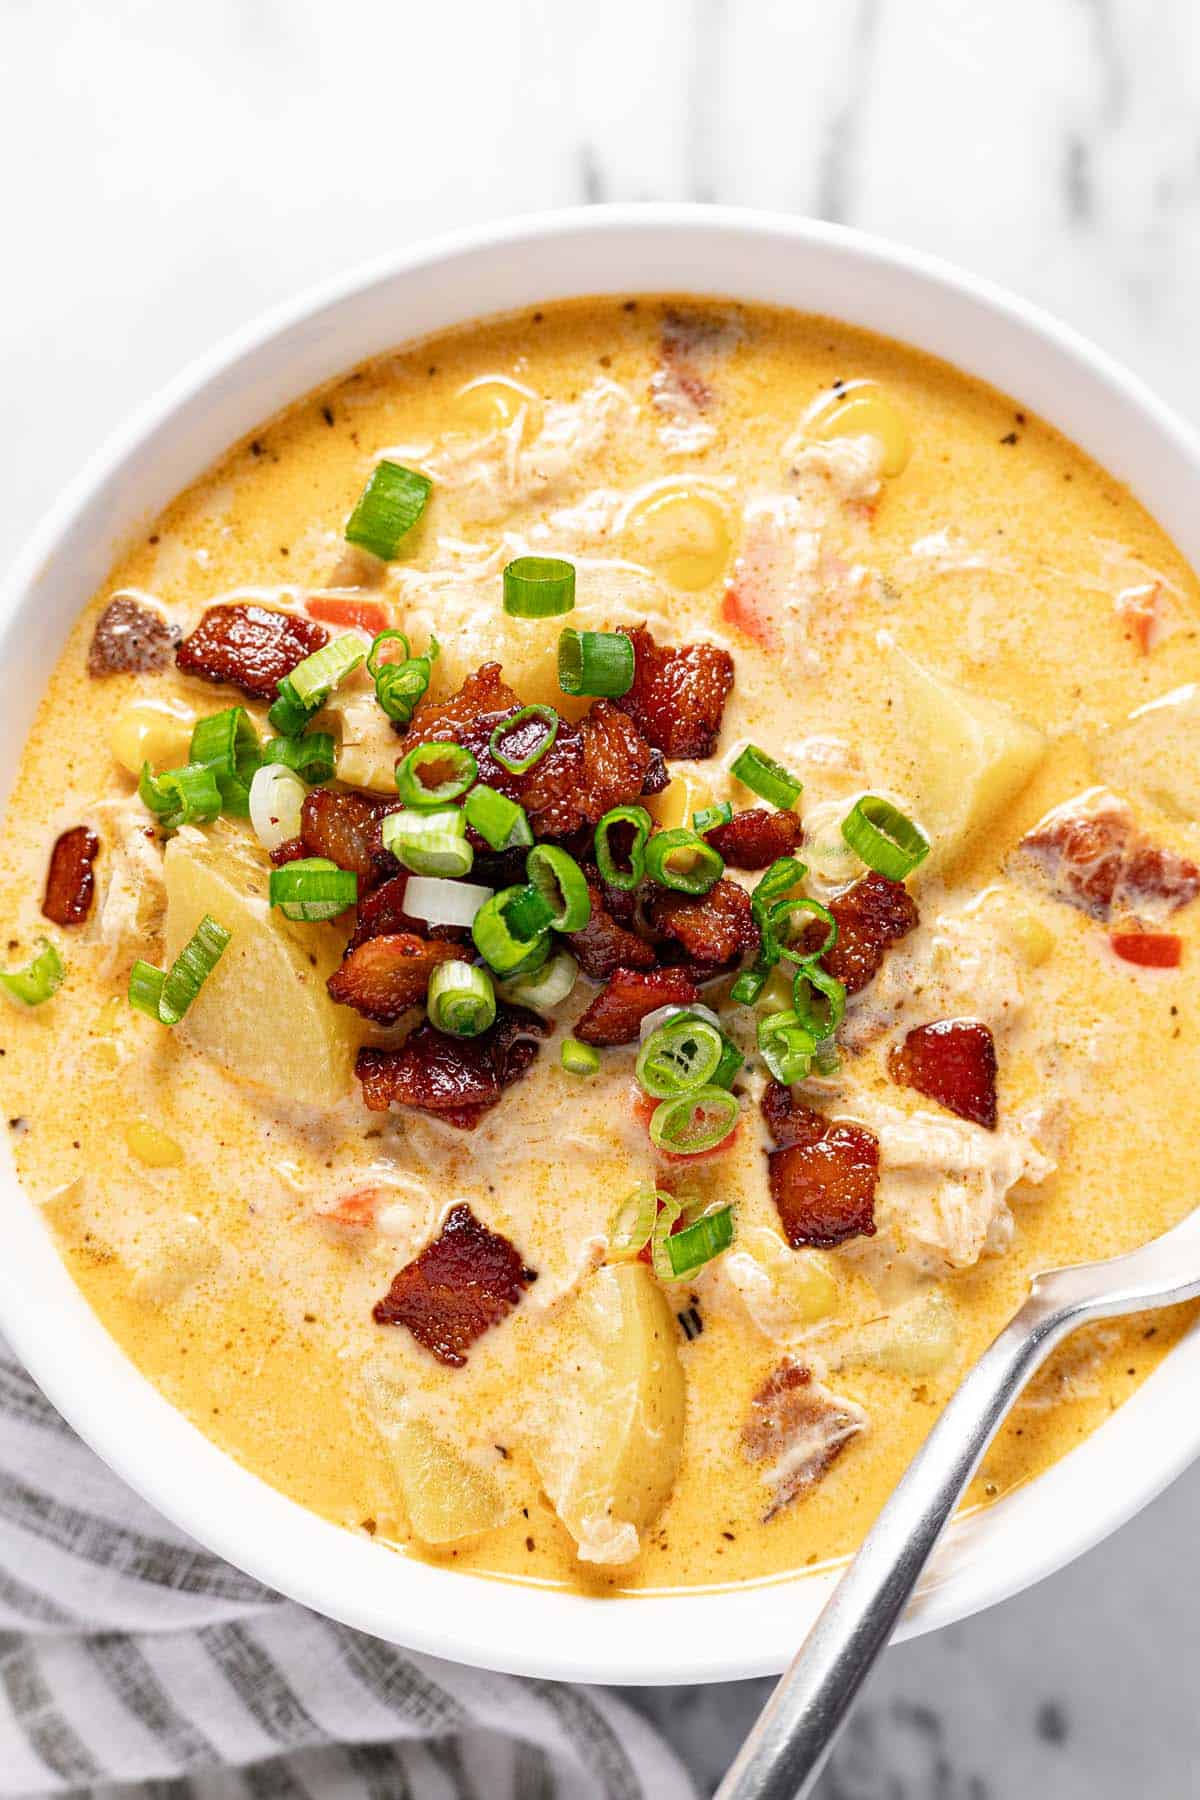 Bowl of chicken corn chowder garnished with bacon and green onion.